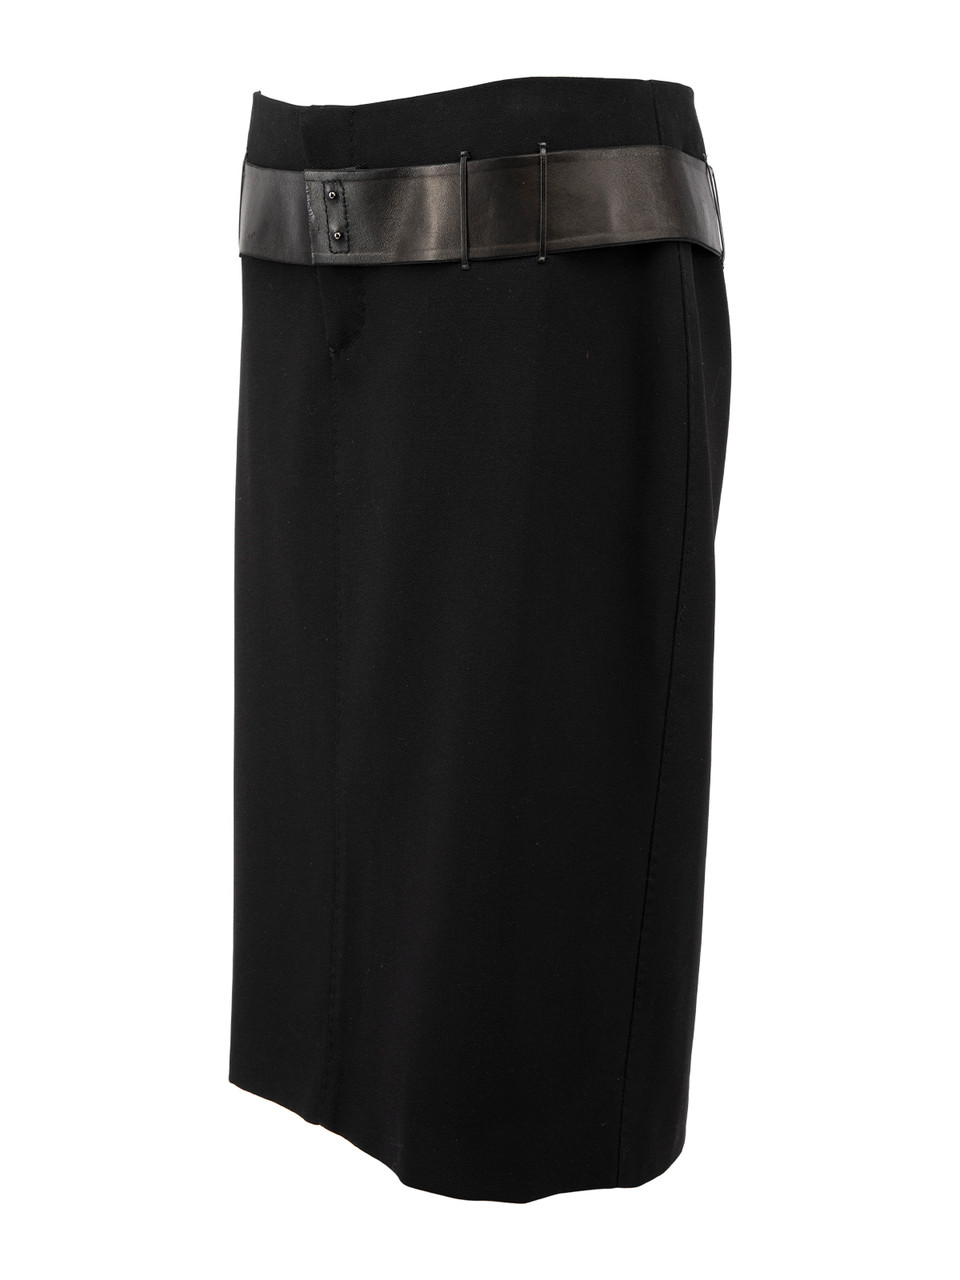 Gucci Pencil Skirt with Leather Belt